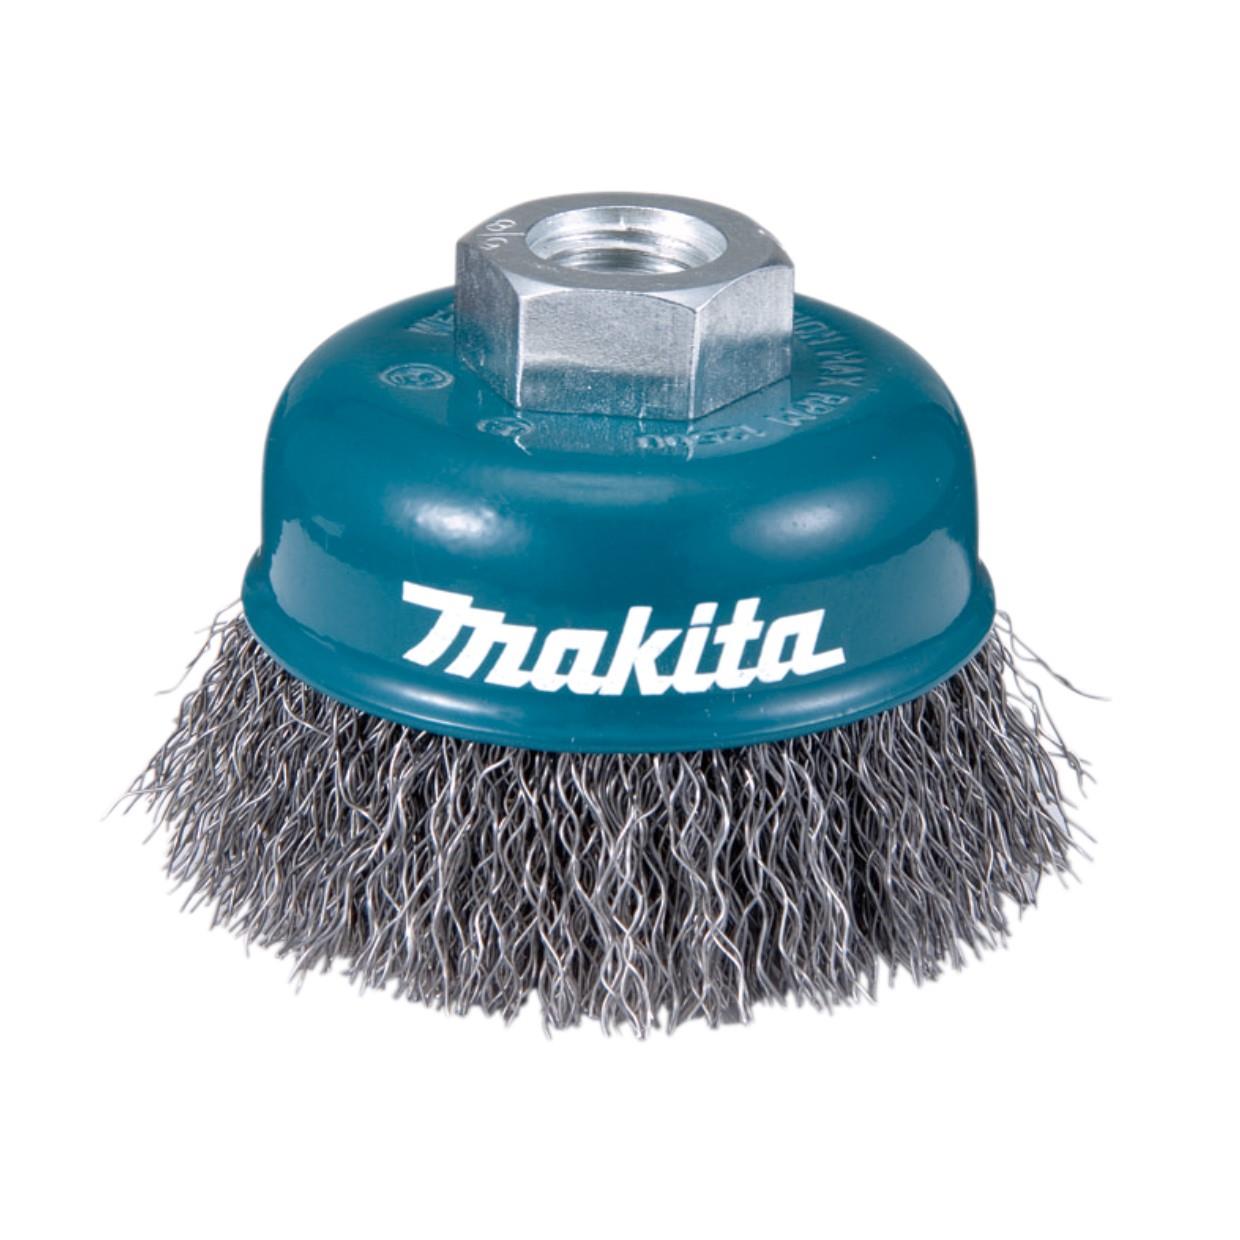 Makita D-24094 Crimp Wire Cup Brush; For Angle Grinder; 75mm Diameter; M14 x 2 Spindle Thread